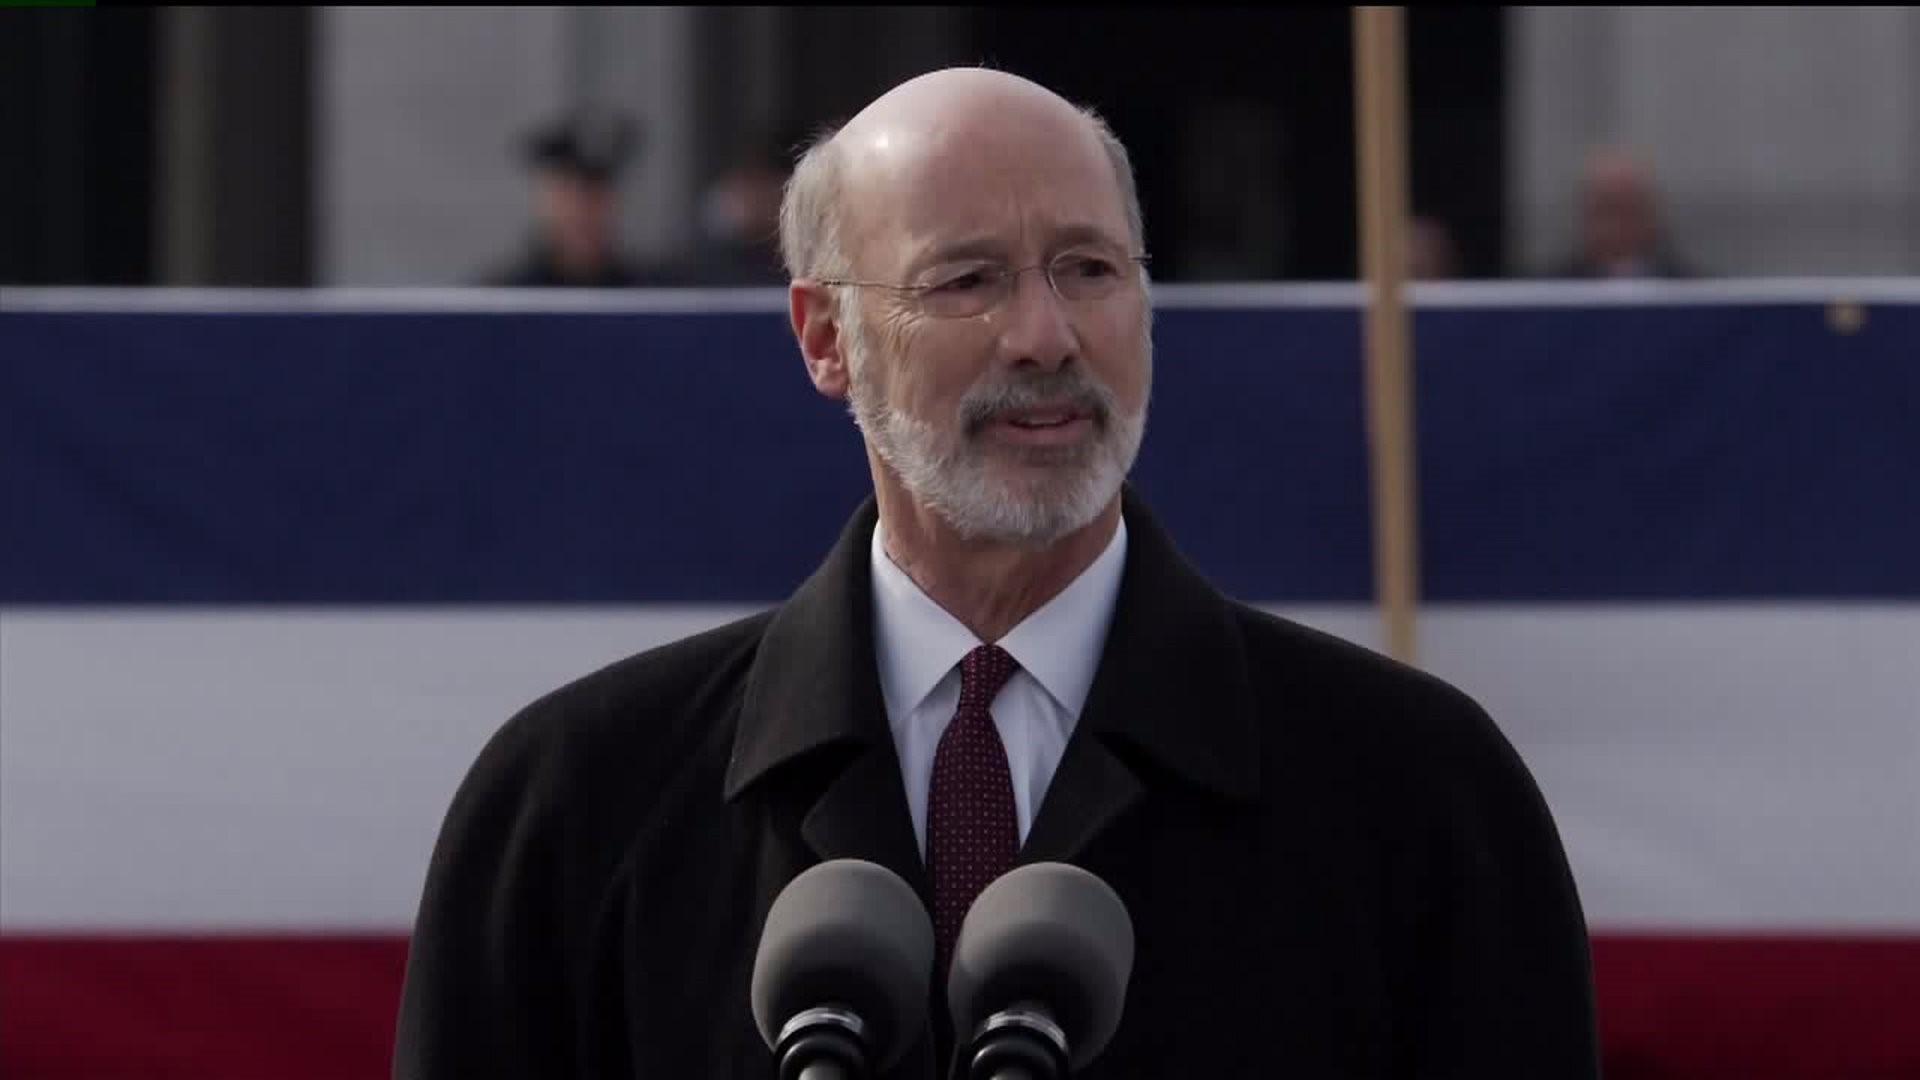 Governor Tom Wolf Takes Oath of Office for Second Term